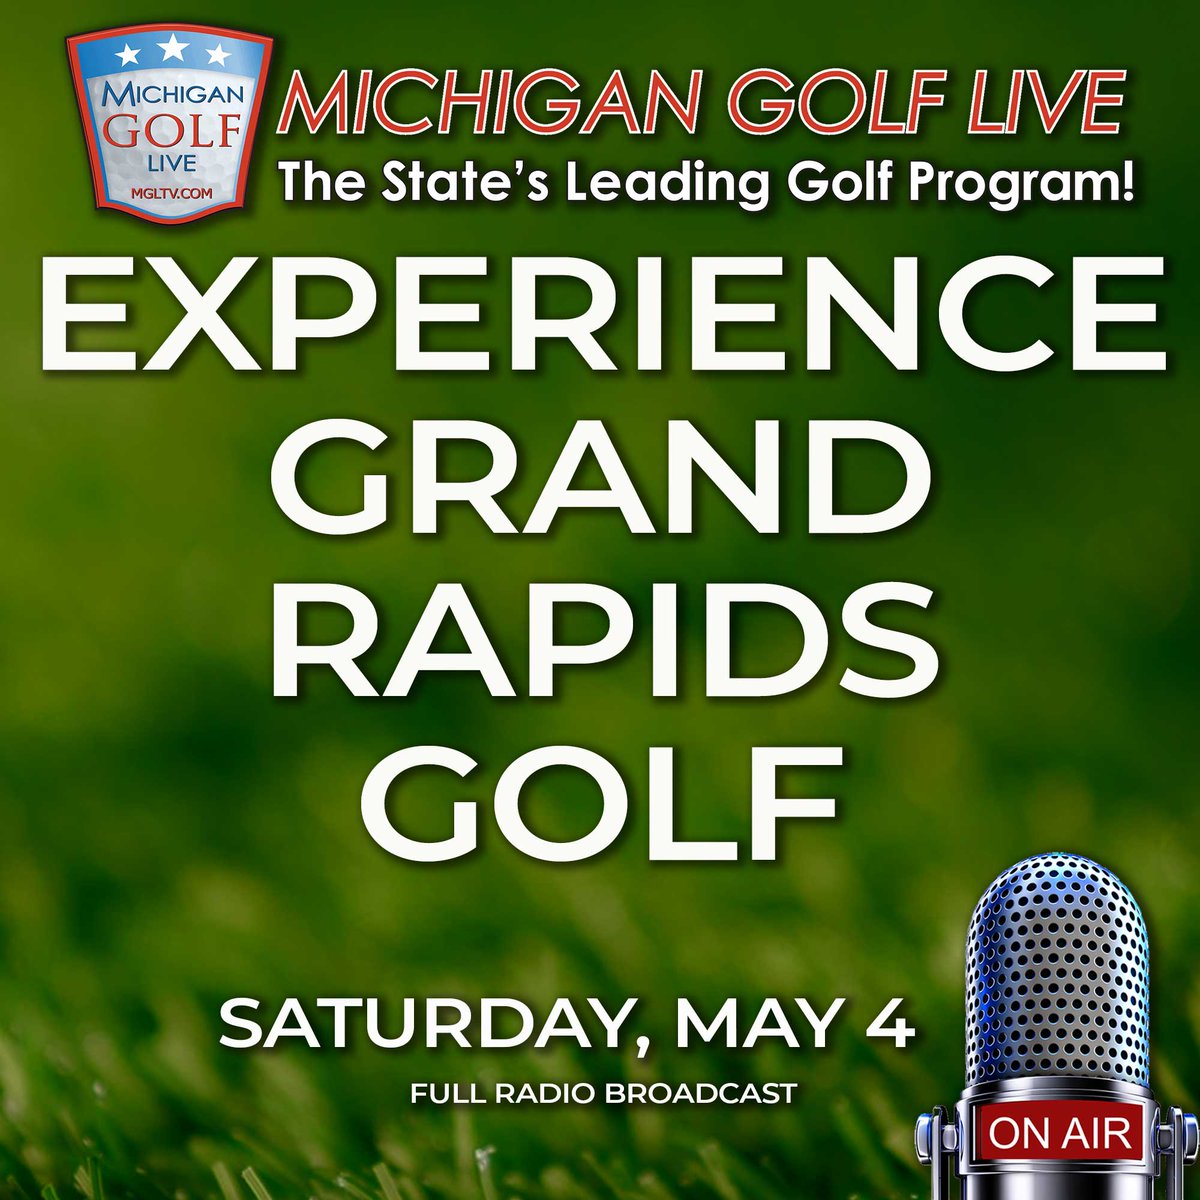 We officially launched Season 25 of MGL Radio across the state today. If you missed it on the air, check out the podcast version for stay/play info in Grand Rapids and details on 2 really cool contests!

LISTEN: traffic.libsyn.com/foregolfersnet…

#Golf #experiencegr #puremichigan